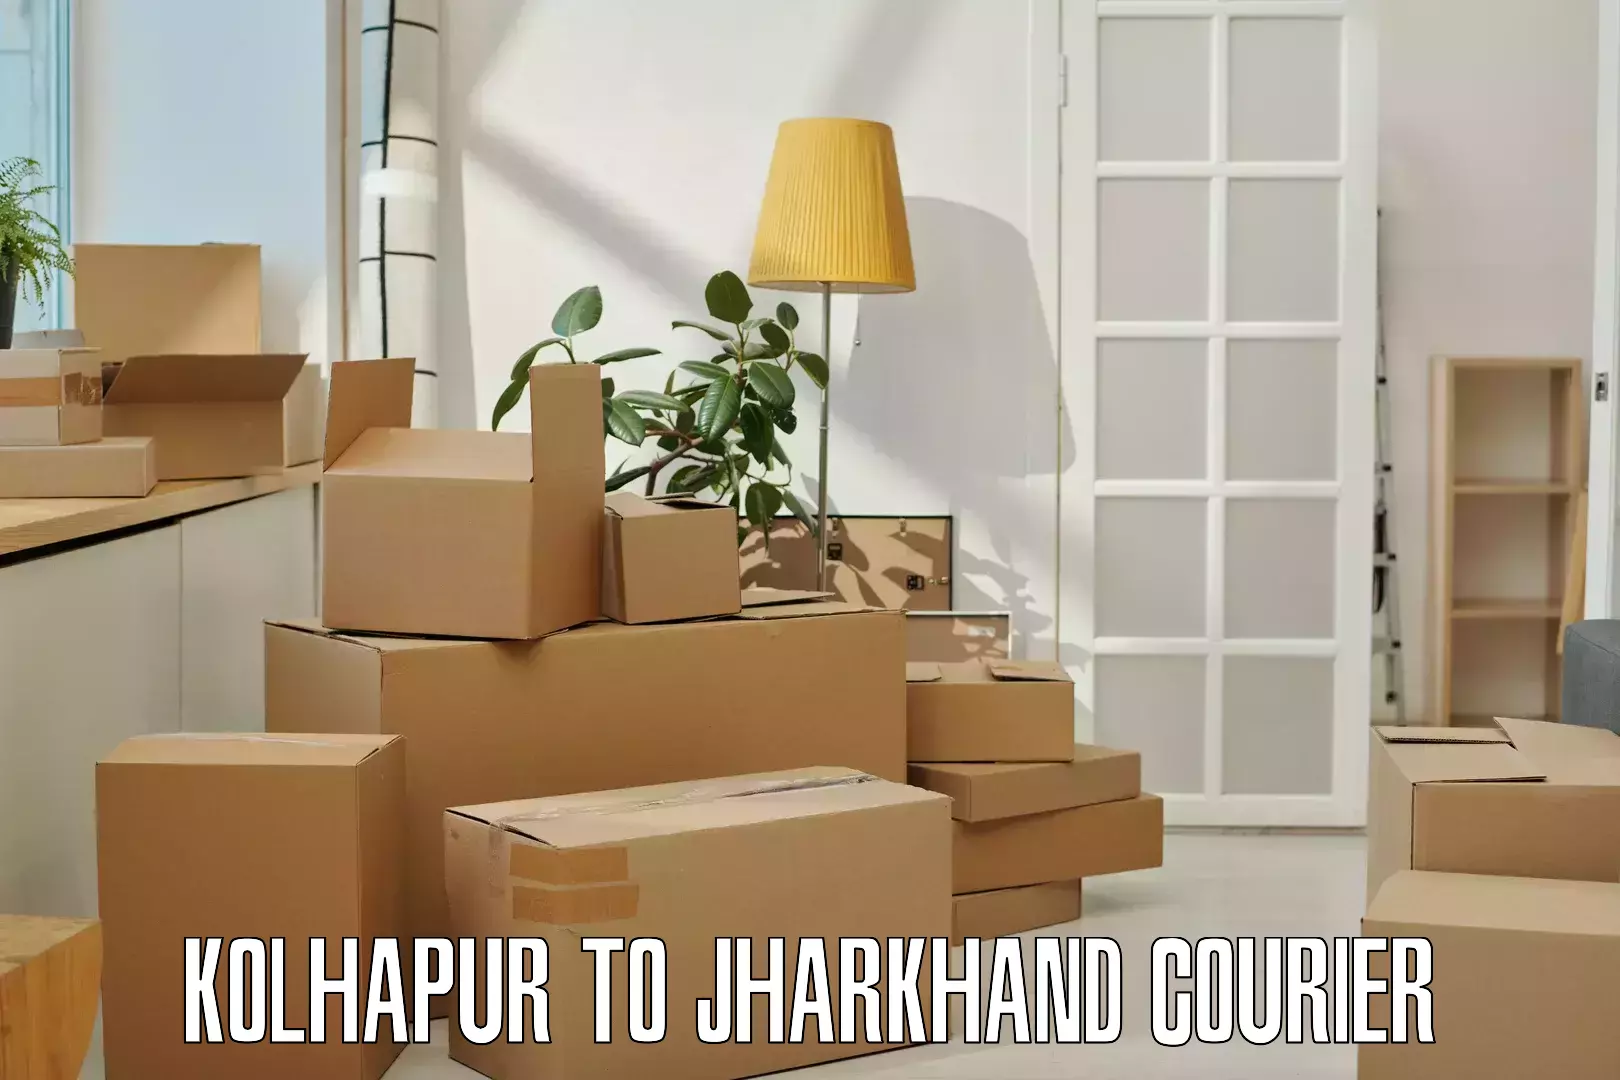 Full-service courier options Kolhapur to Barkagaon